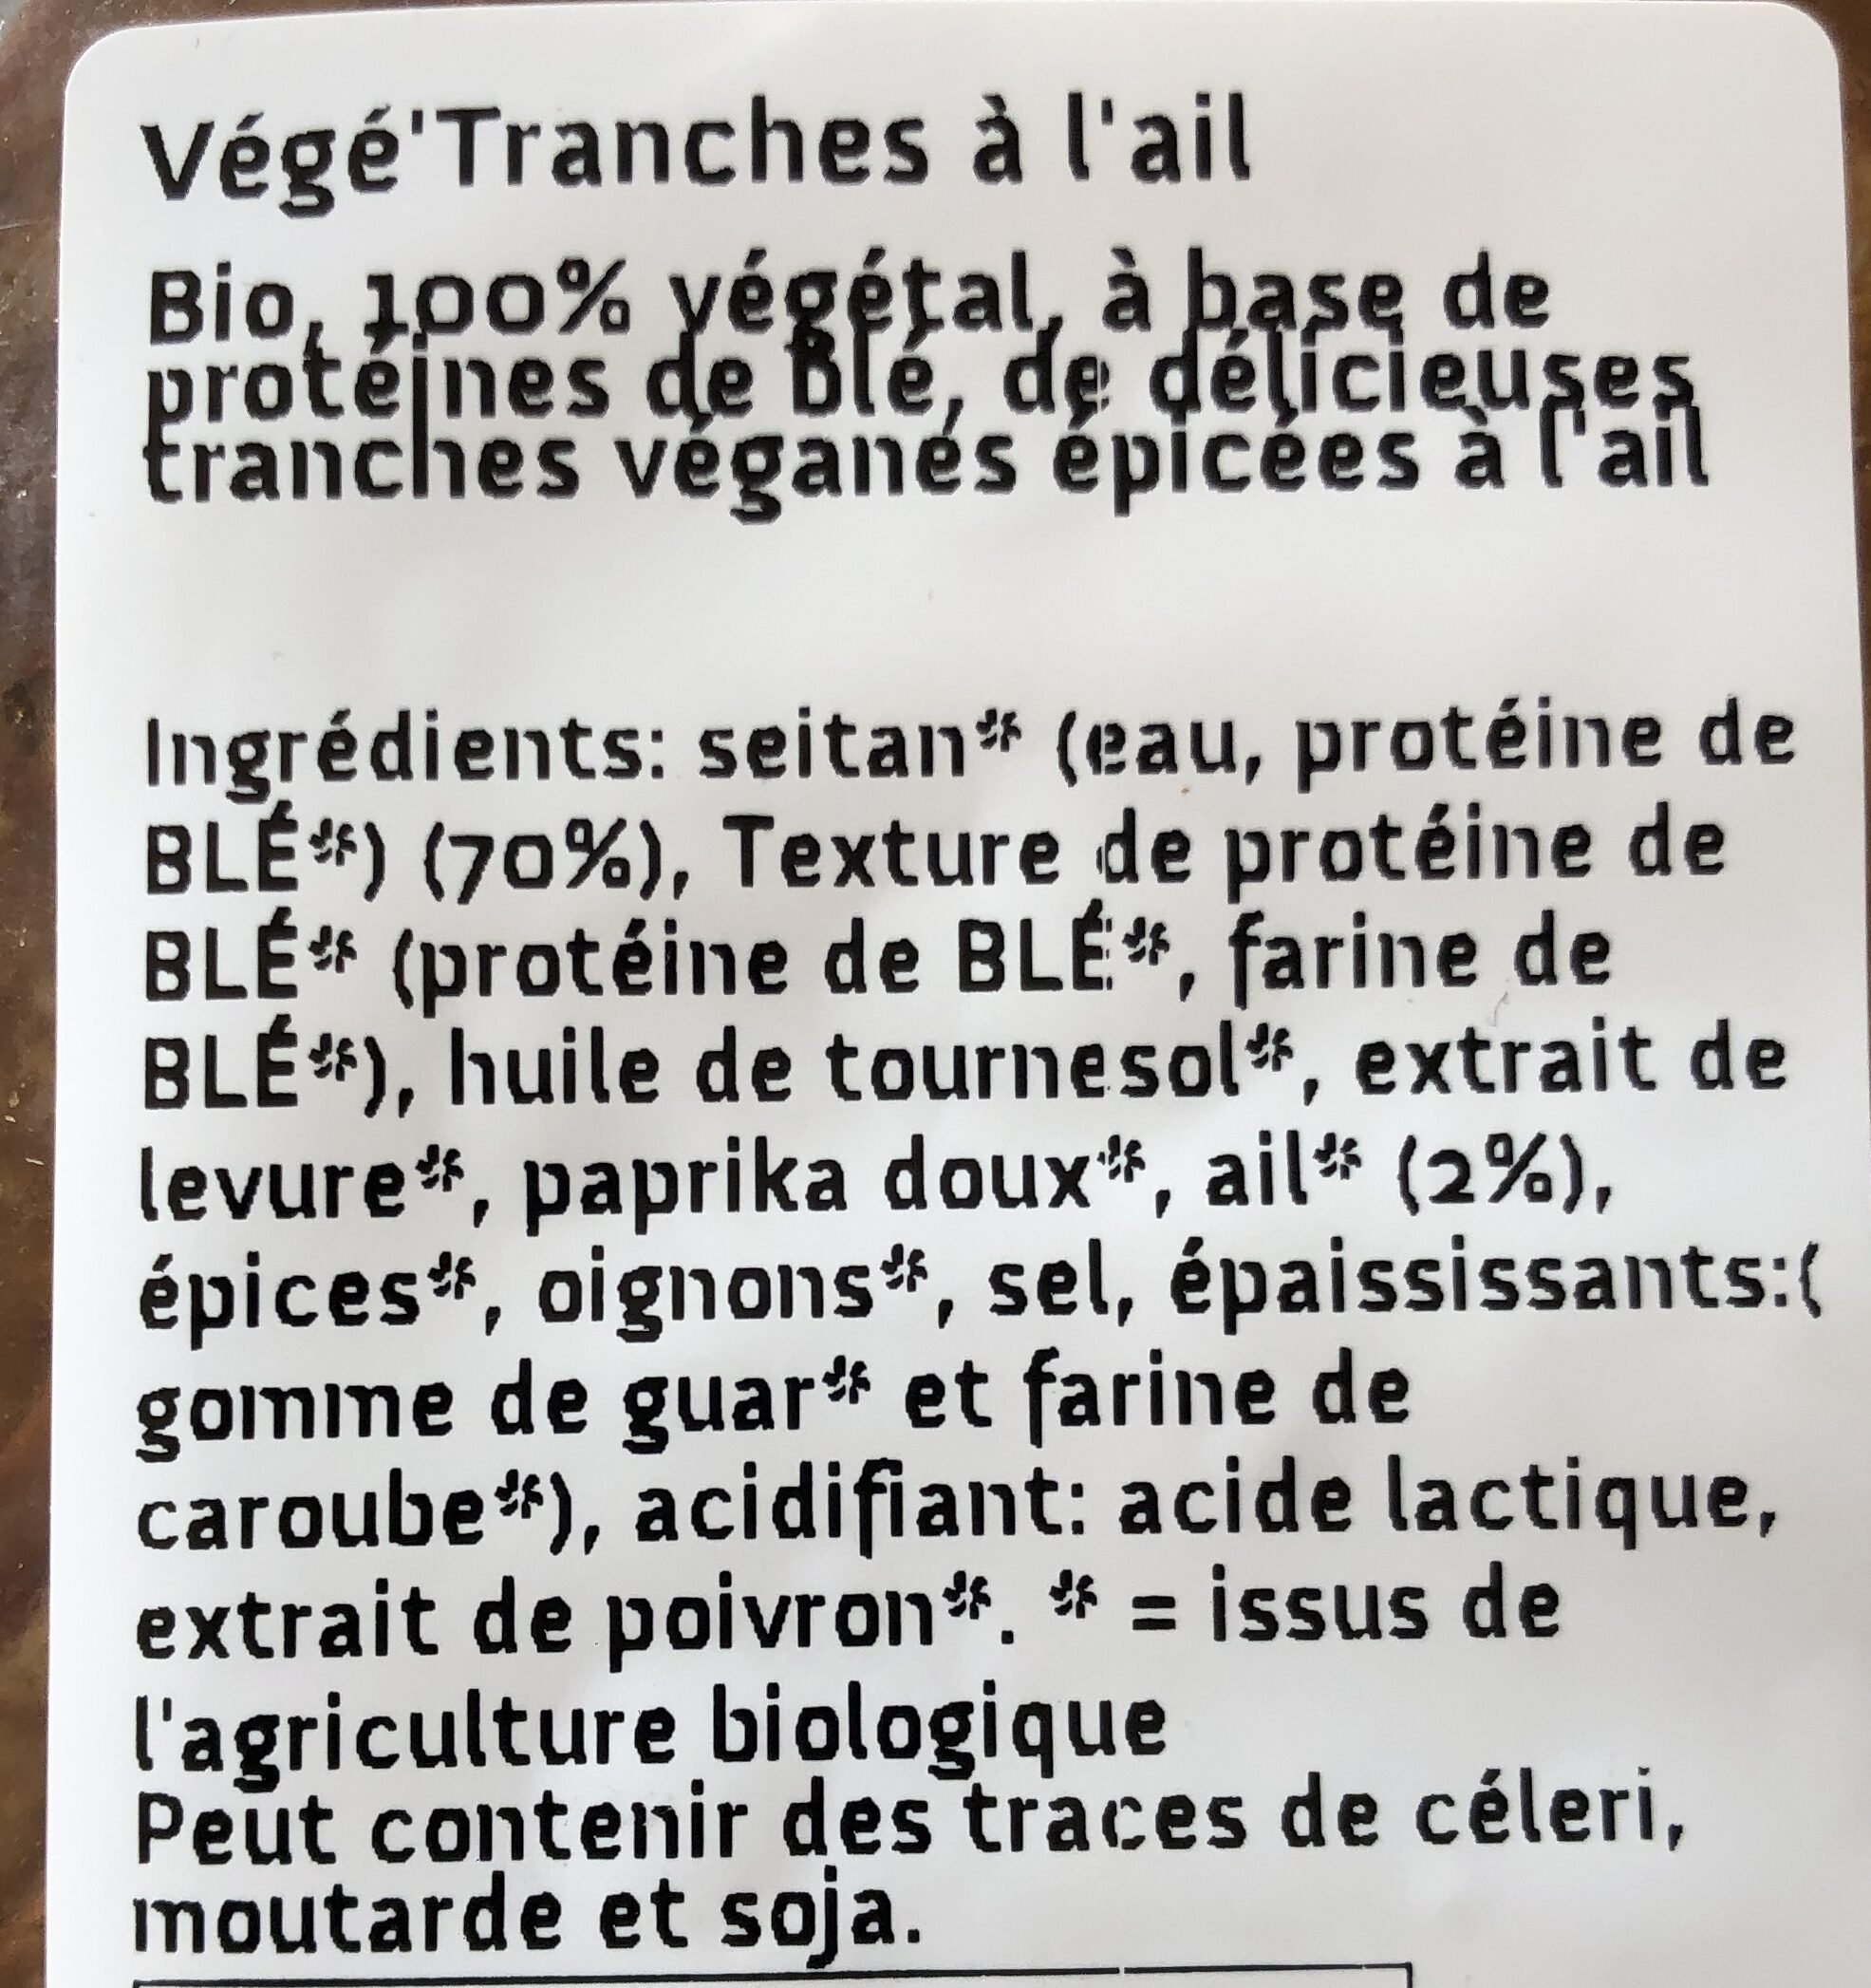 Vege’tranches a l’ail - Ingredients - fr